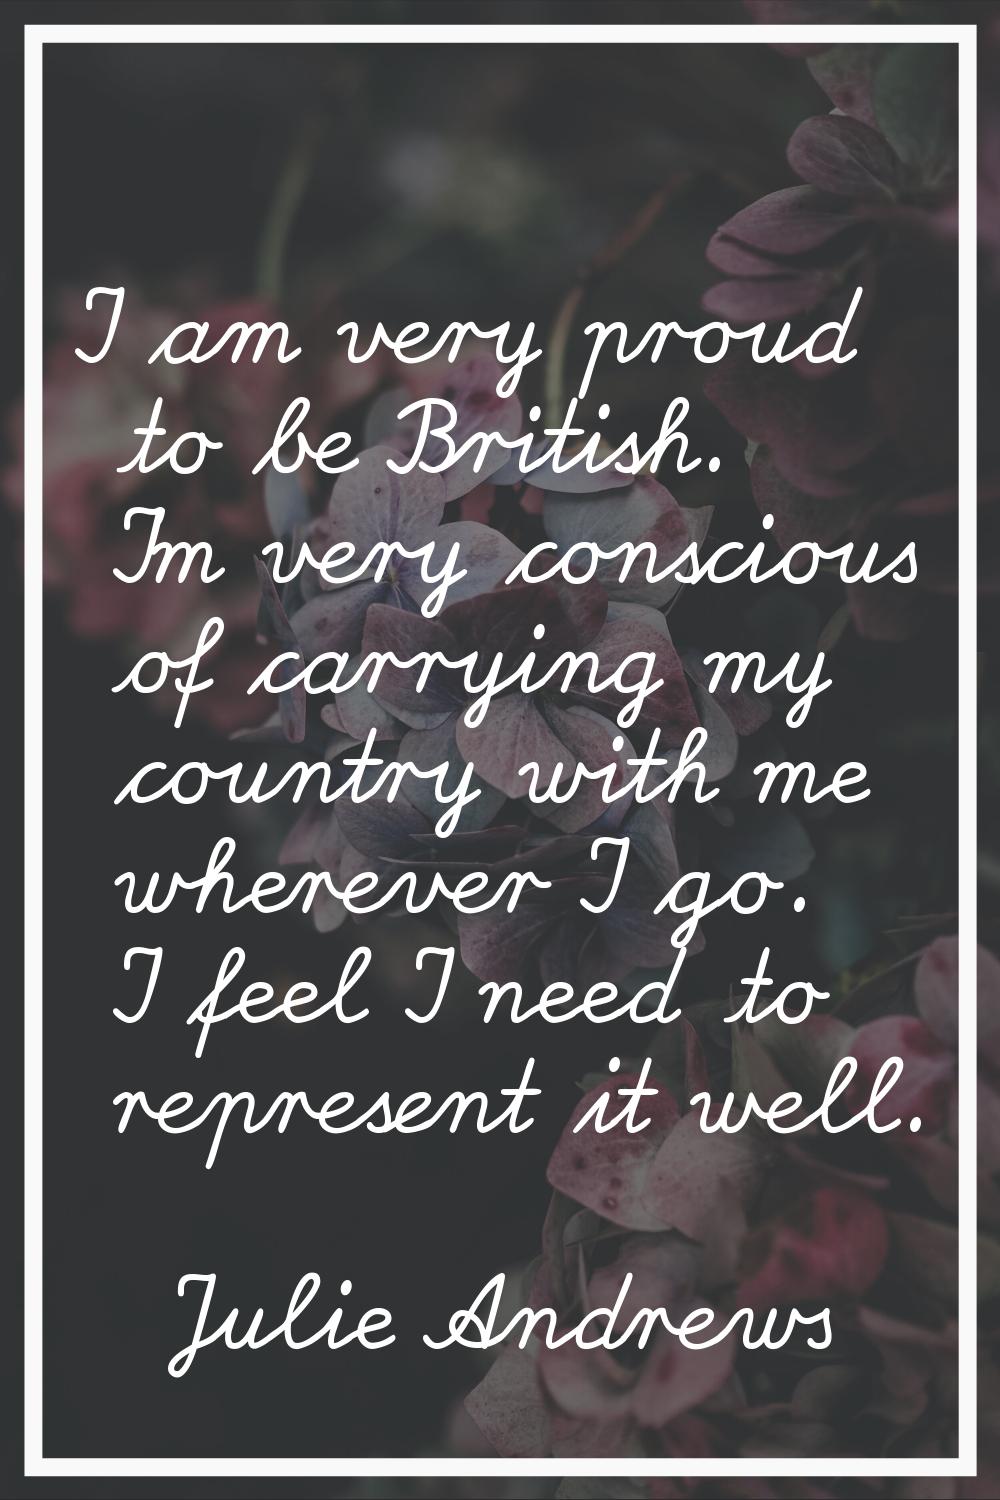 I am very proud to be British. I'm very conscious of carrying my country with me wherever I go. I f